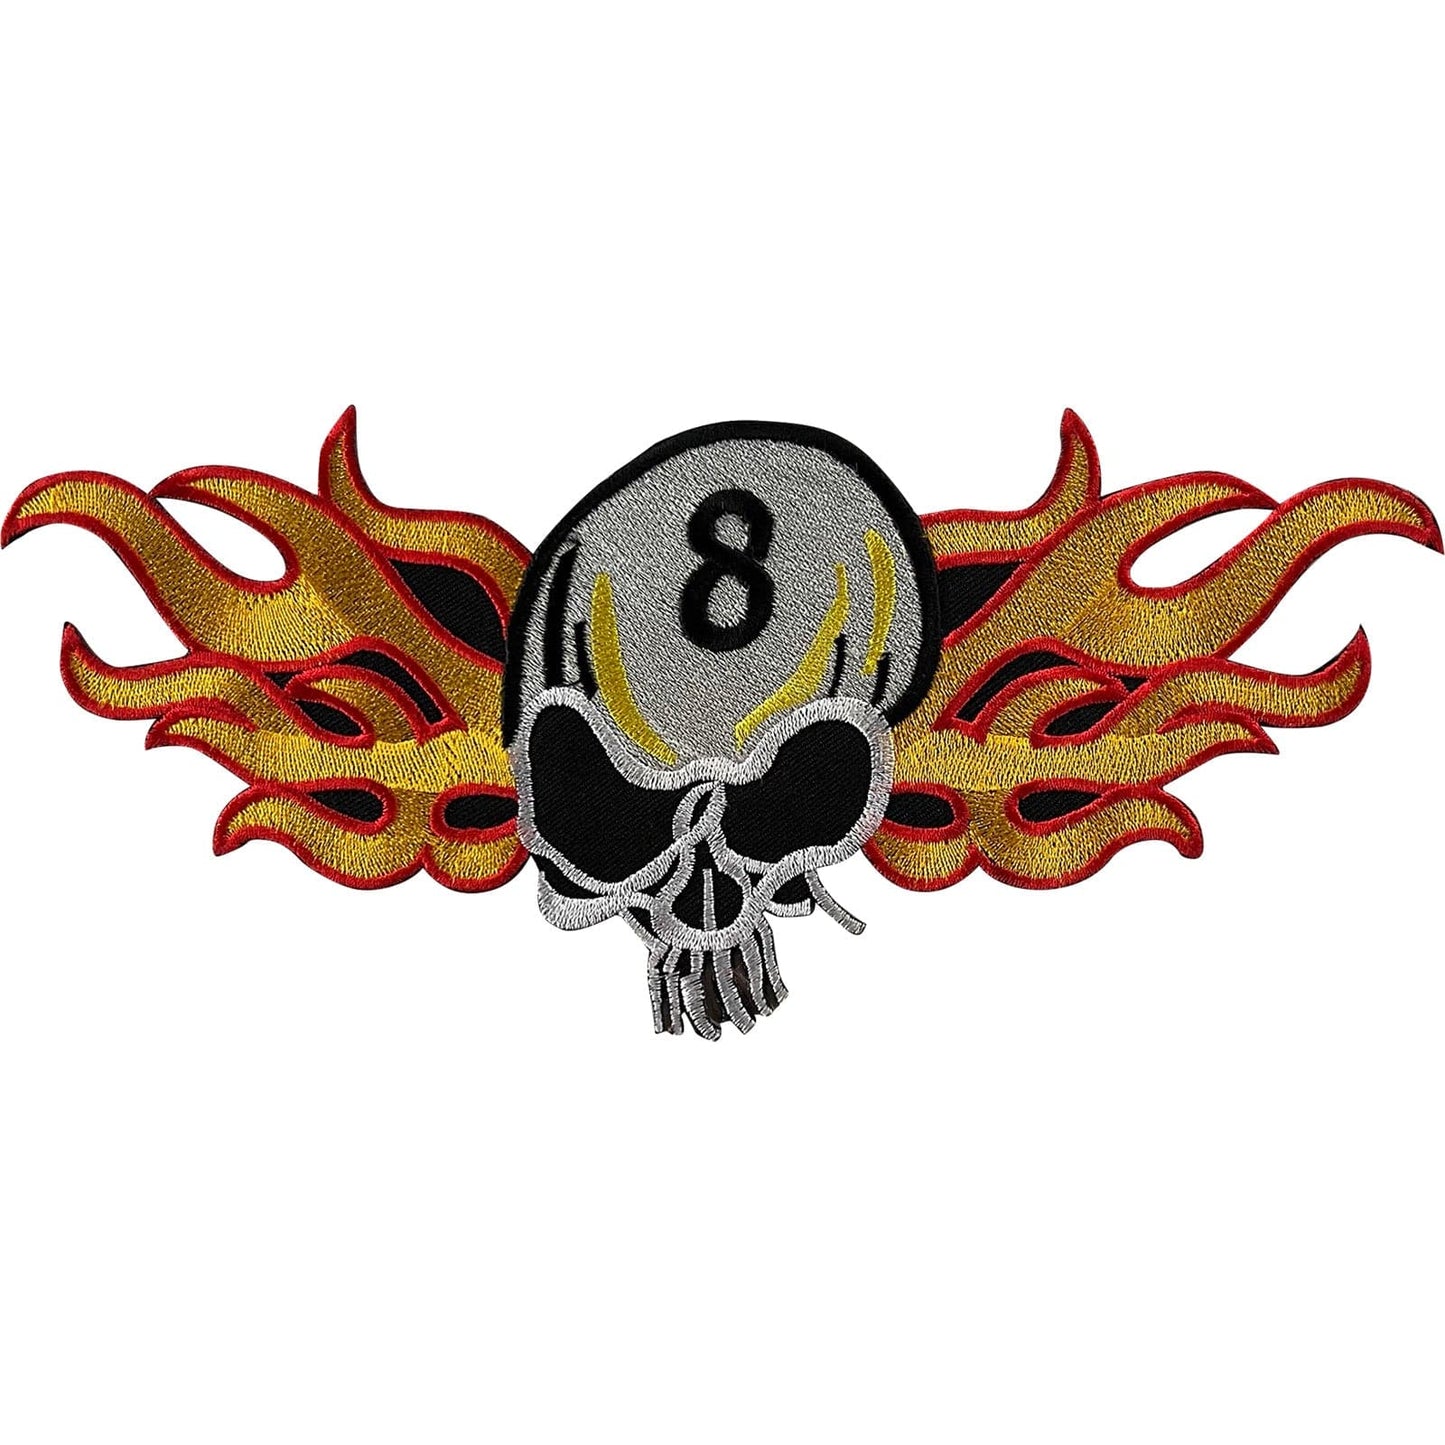 Big Fire Skull Number 8 Patch Iron Sew On T Shirt Jacket Large Embroidery Badge